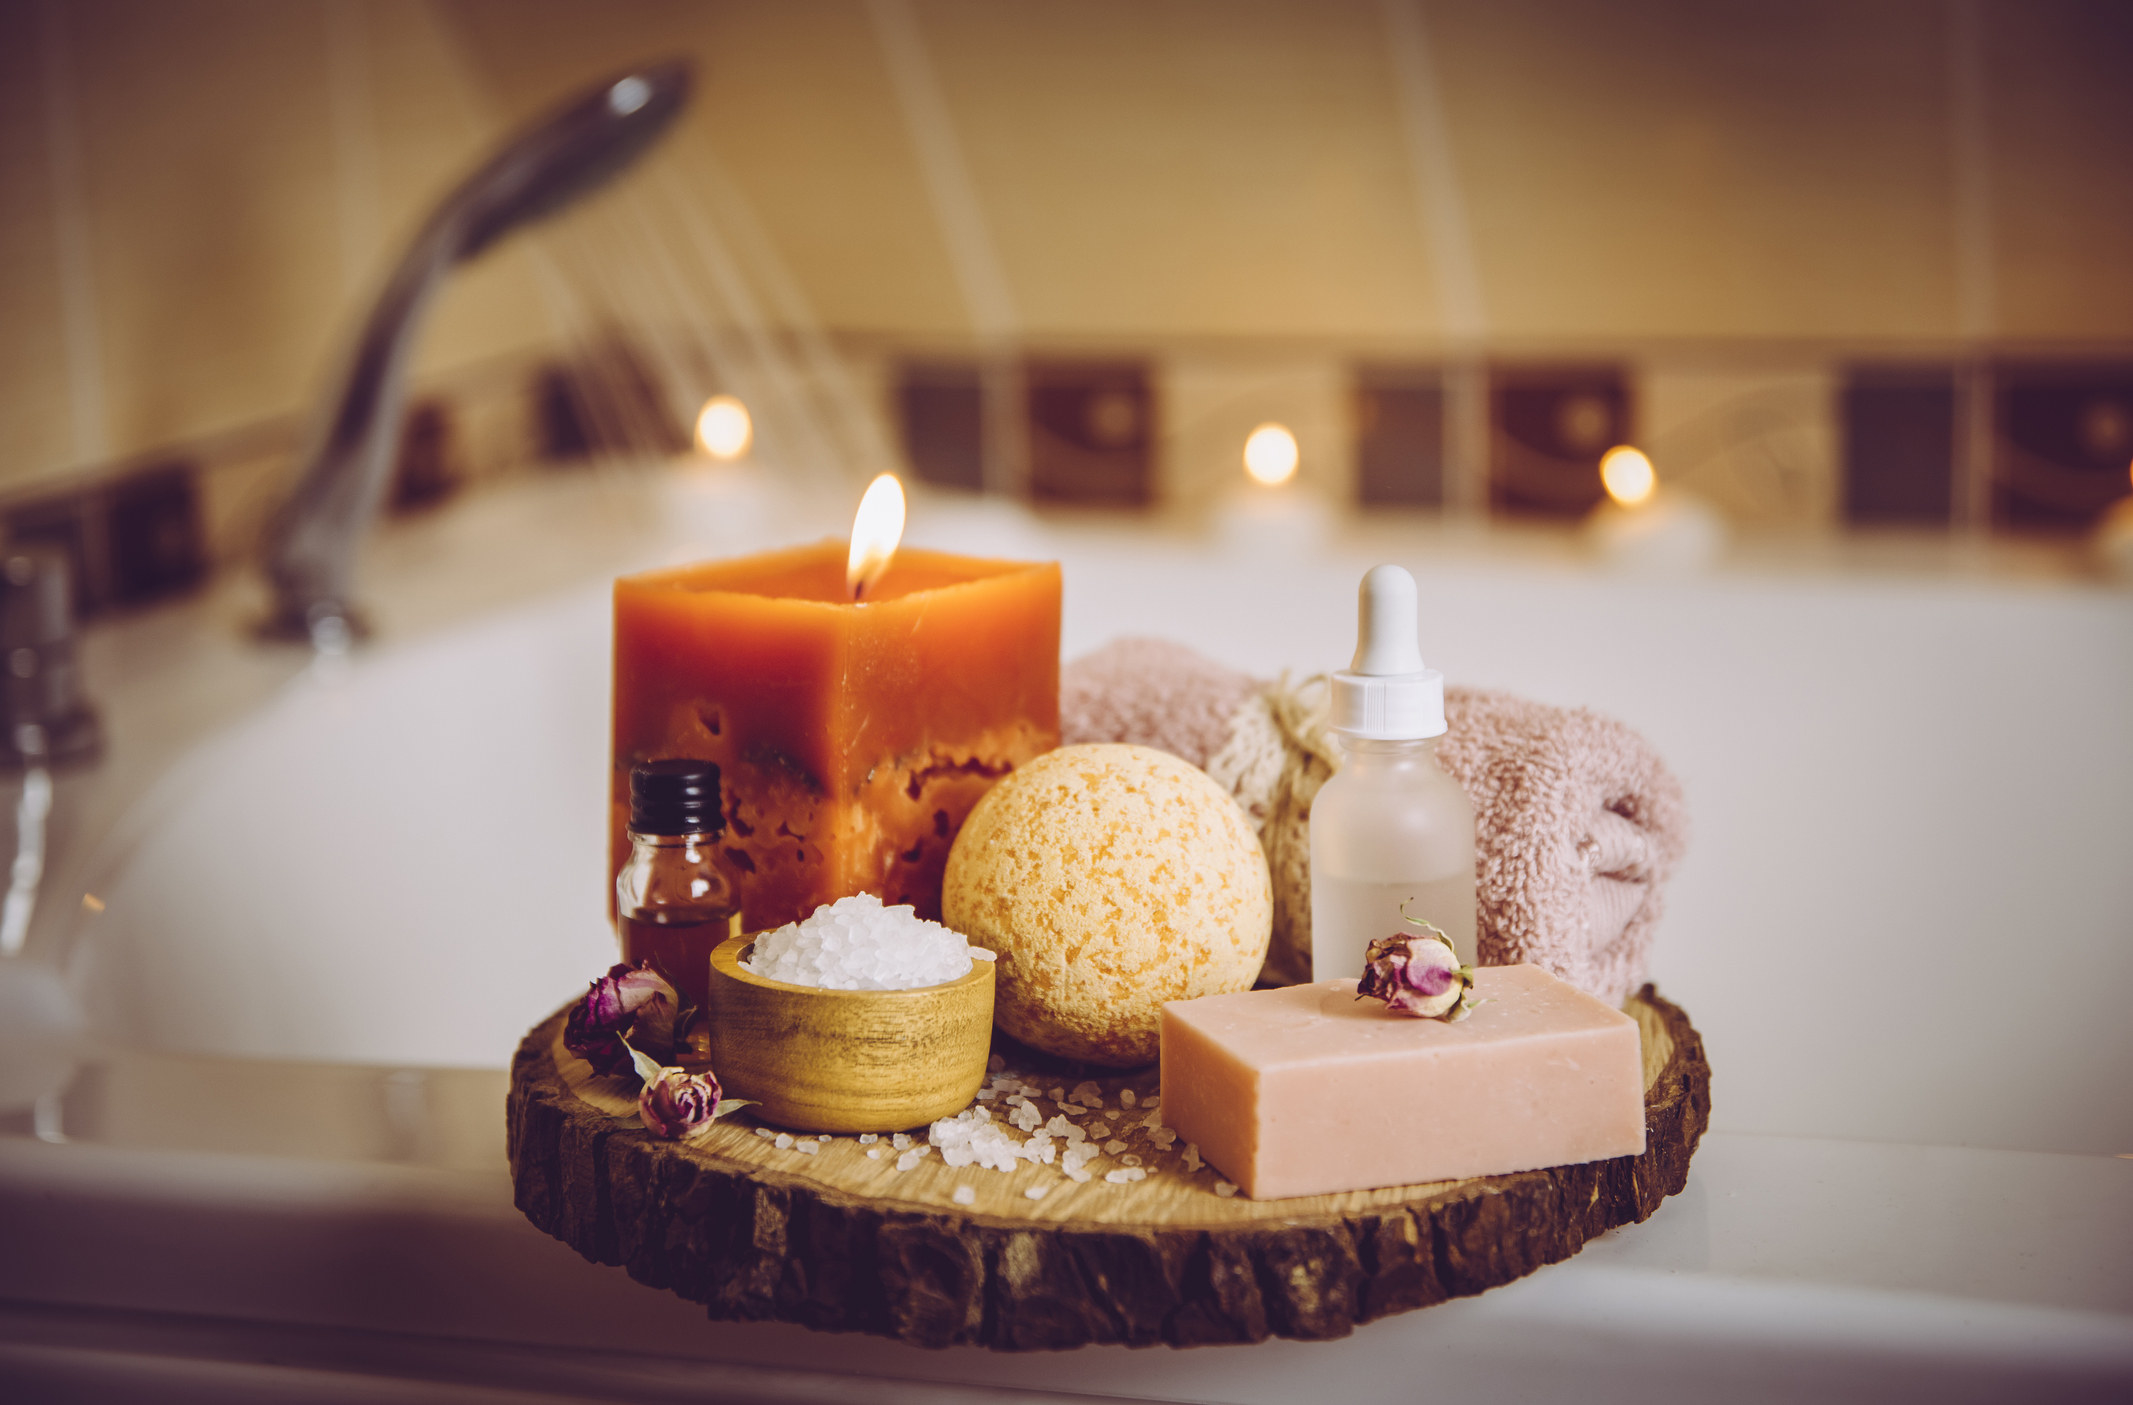 Image of a bath with a candle, essential oils, and bath salts on the side of the tub.